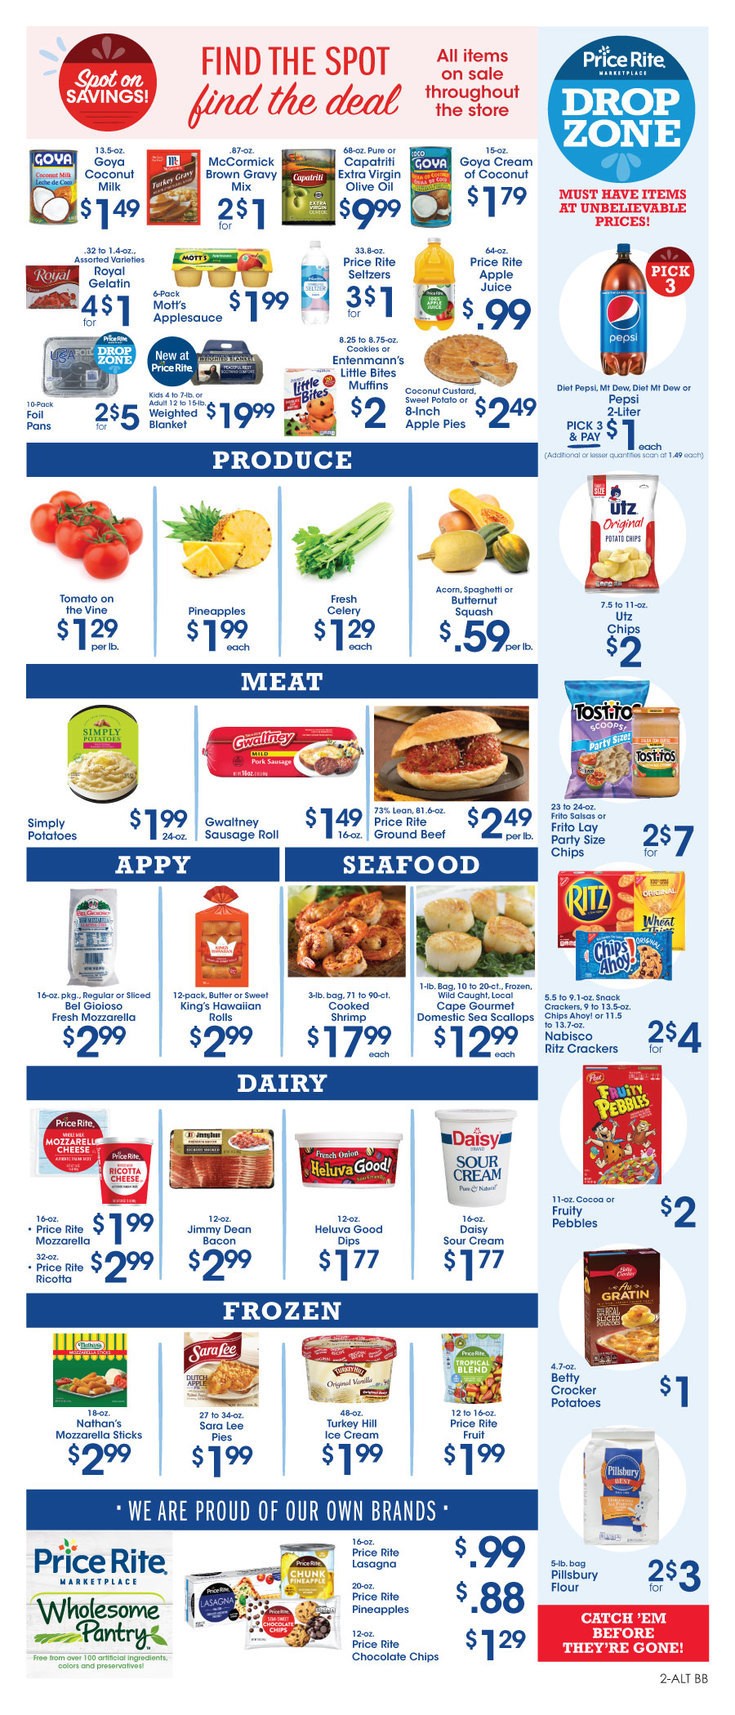 Price Rite Weekly Ad from December 20